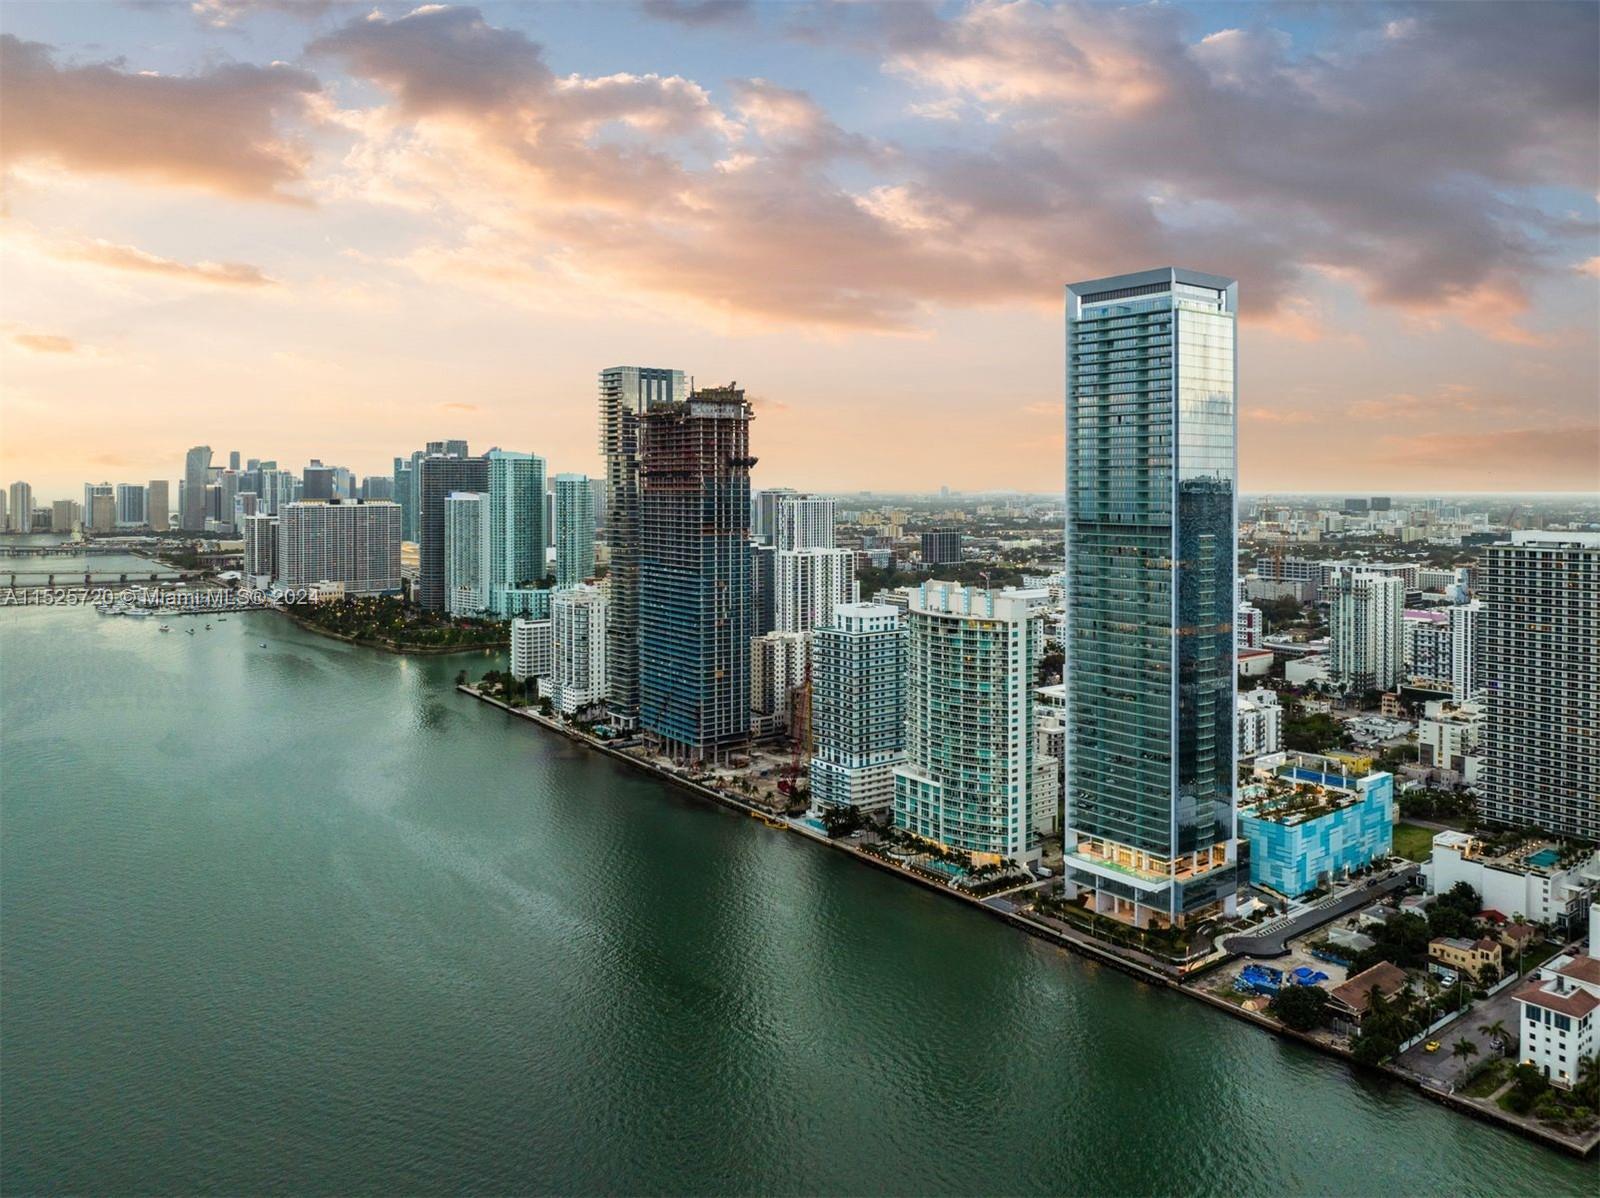 Missoni Baia Unit 3206 boasts spectacular views of Biscayne Bay and the sunset from the primary bedr